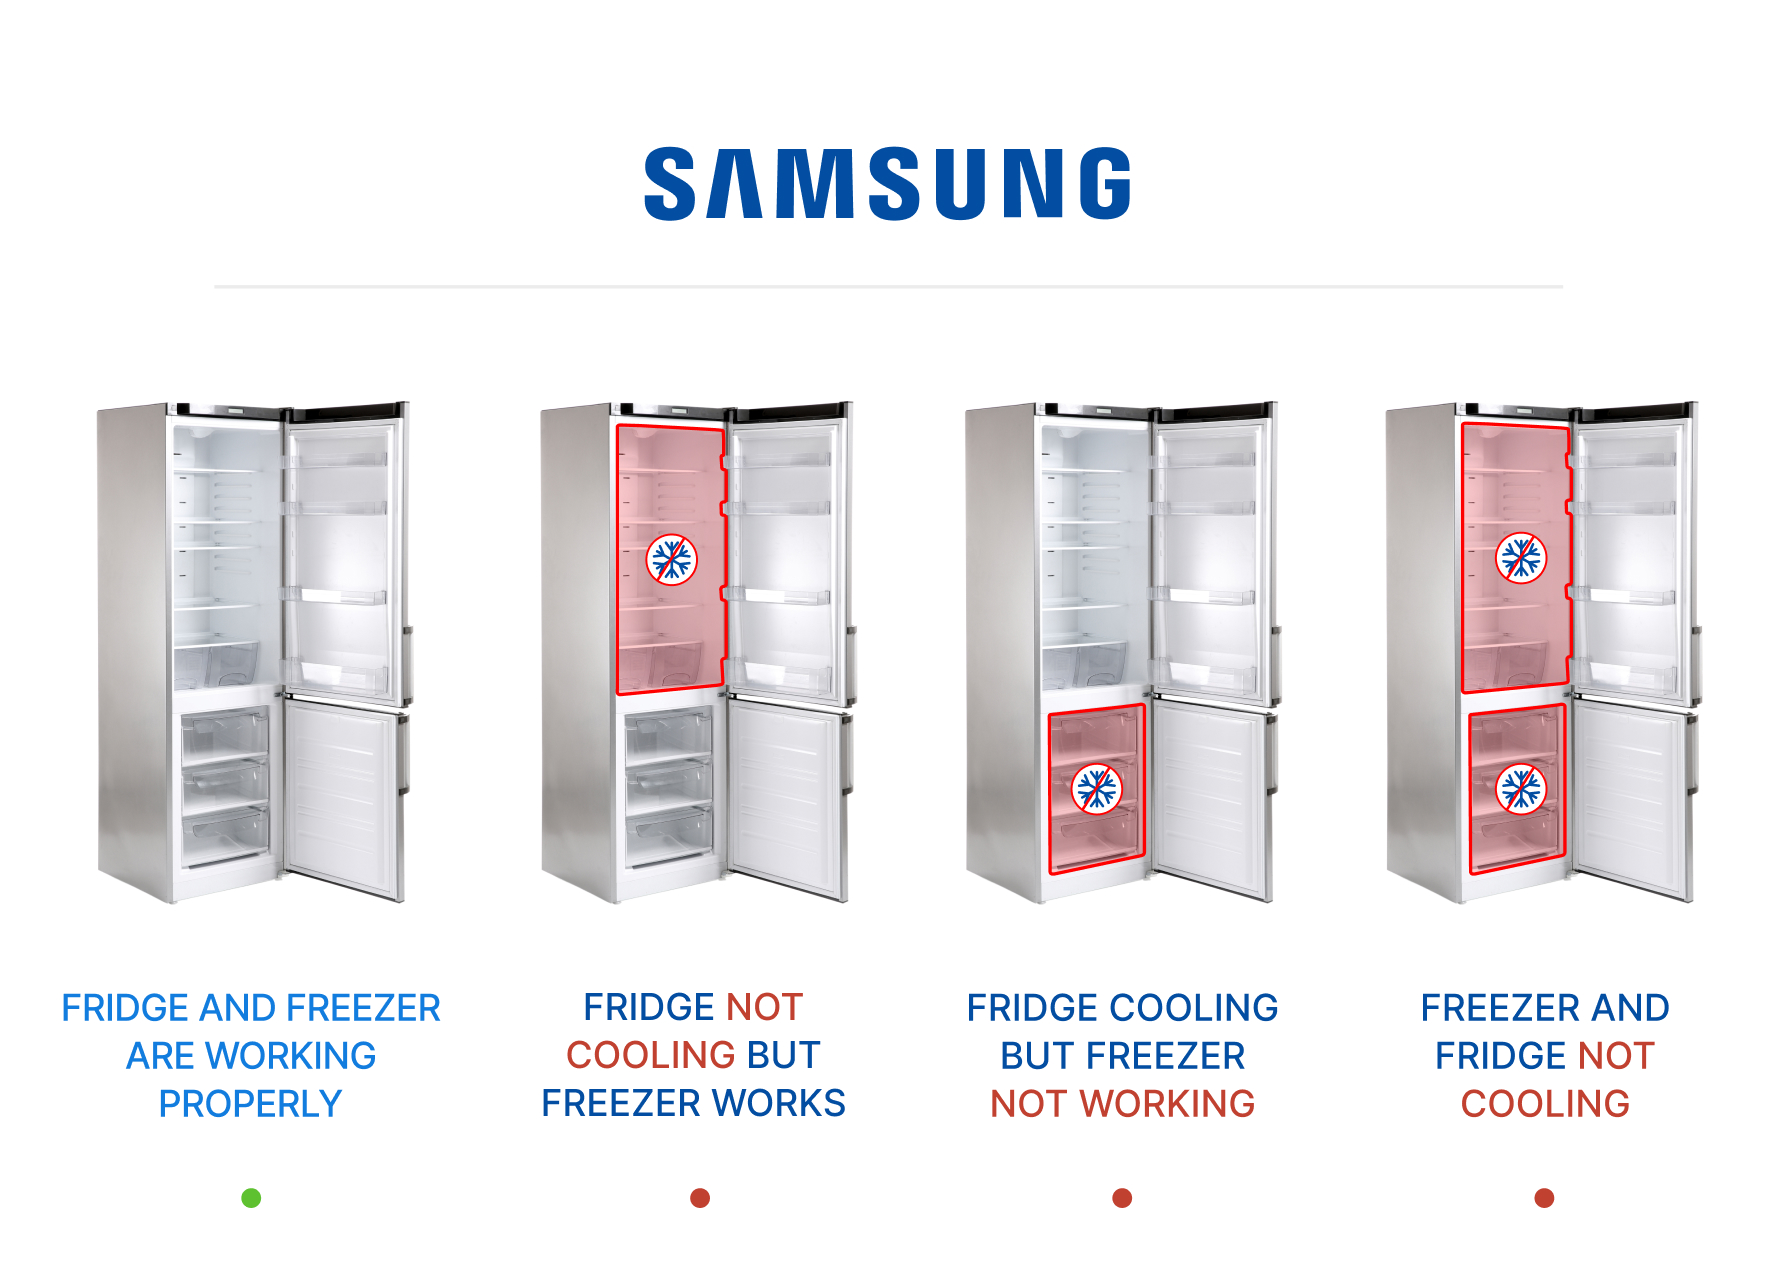 How To Fix A Samsung Fridge That Is Not Cooling Samsung Fridge not Сooling - How to Fix the Problem?